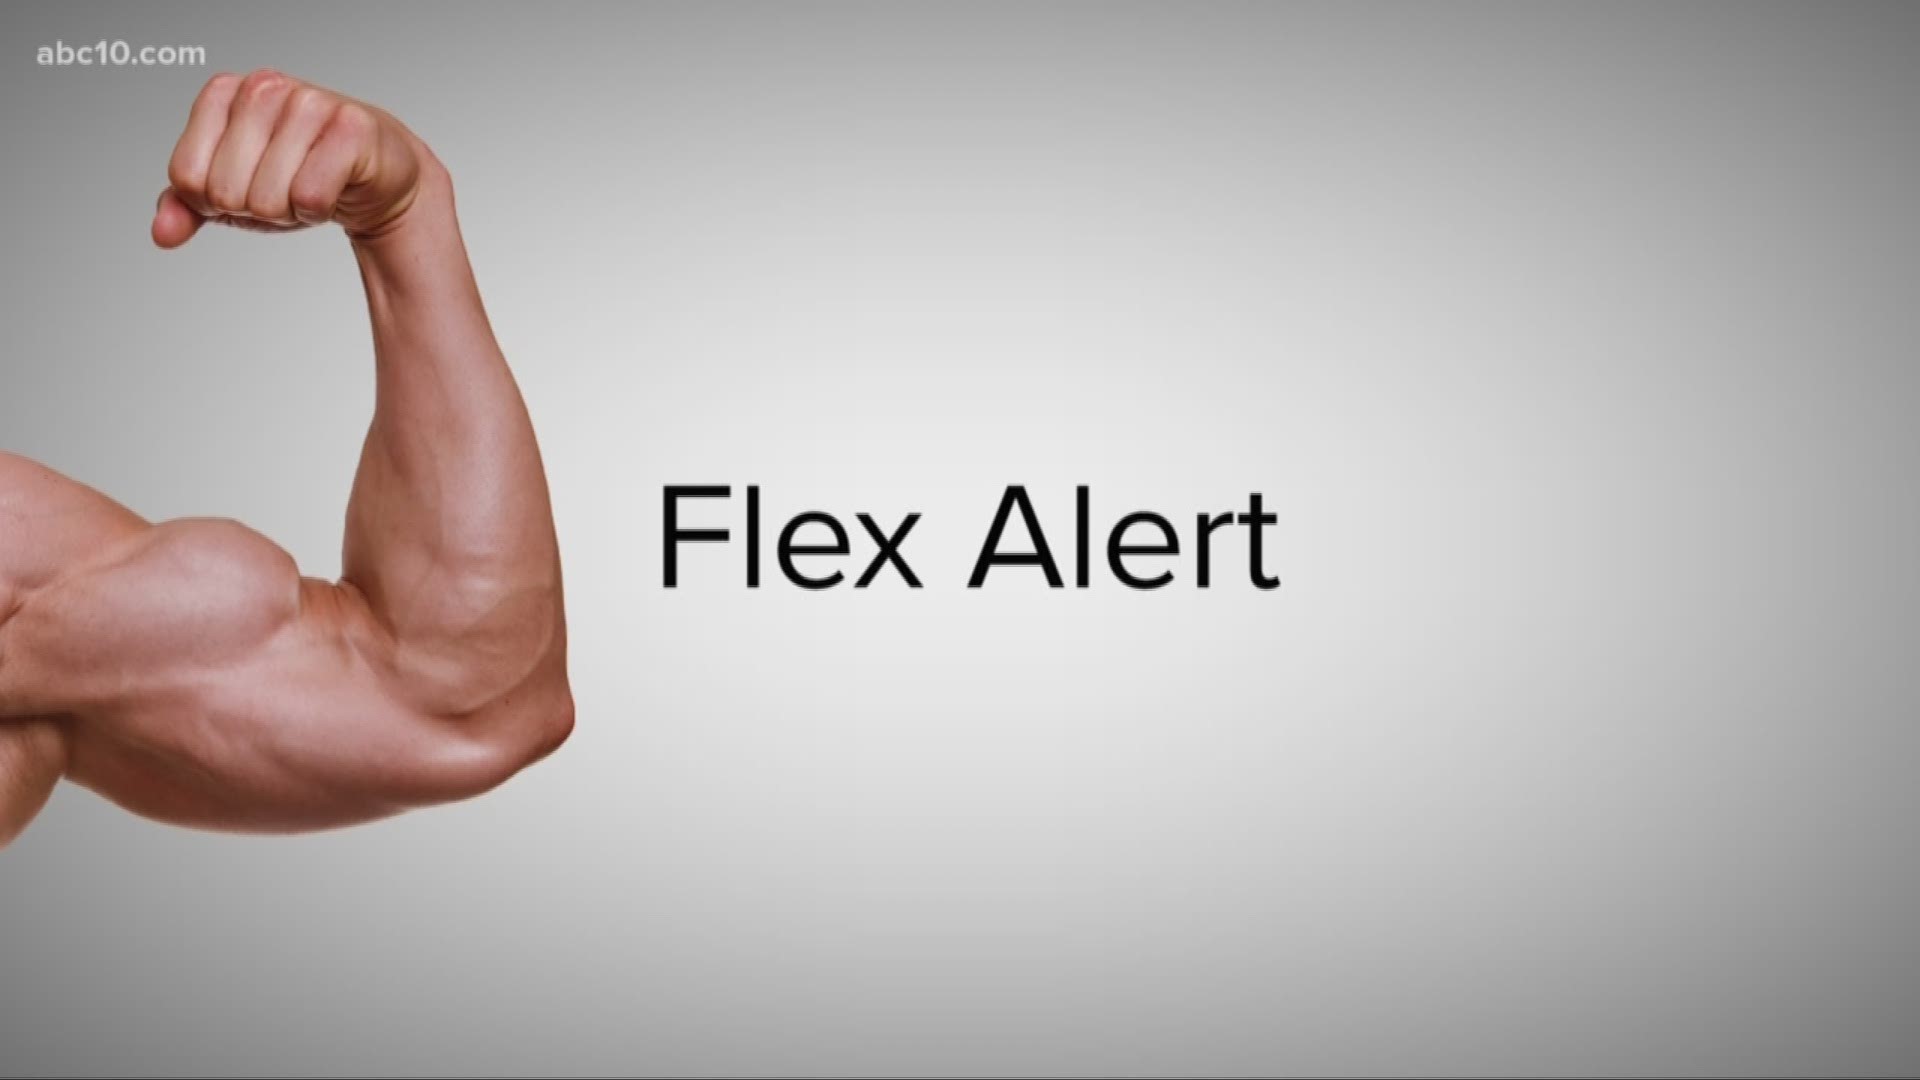 The next two days have been issued as FLEX alert days. You may have heard the term before, but to make sure we are all on the same page, we wanted to connect the dots.